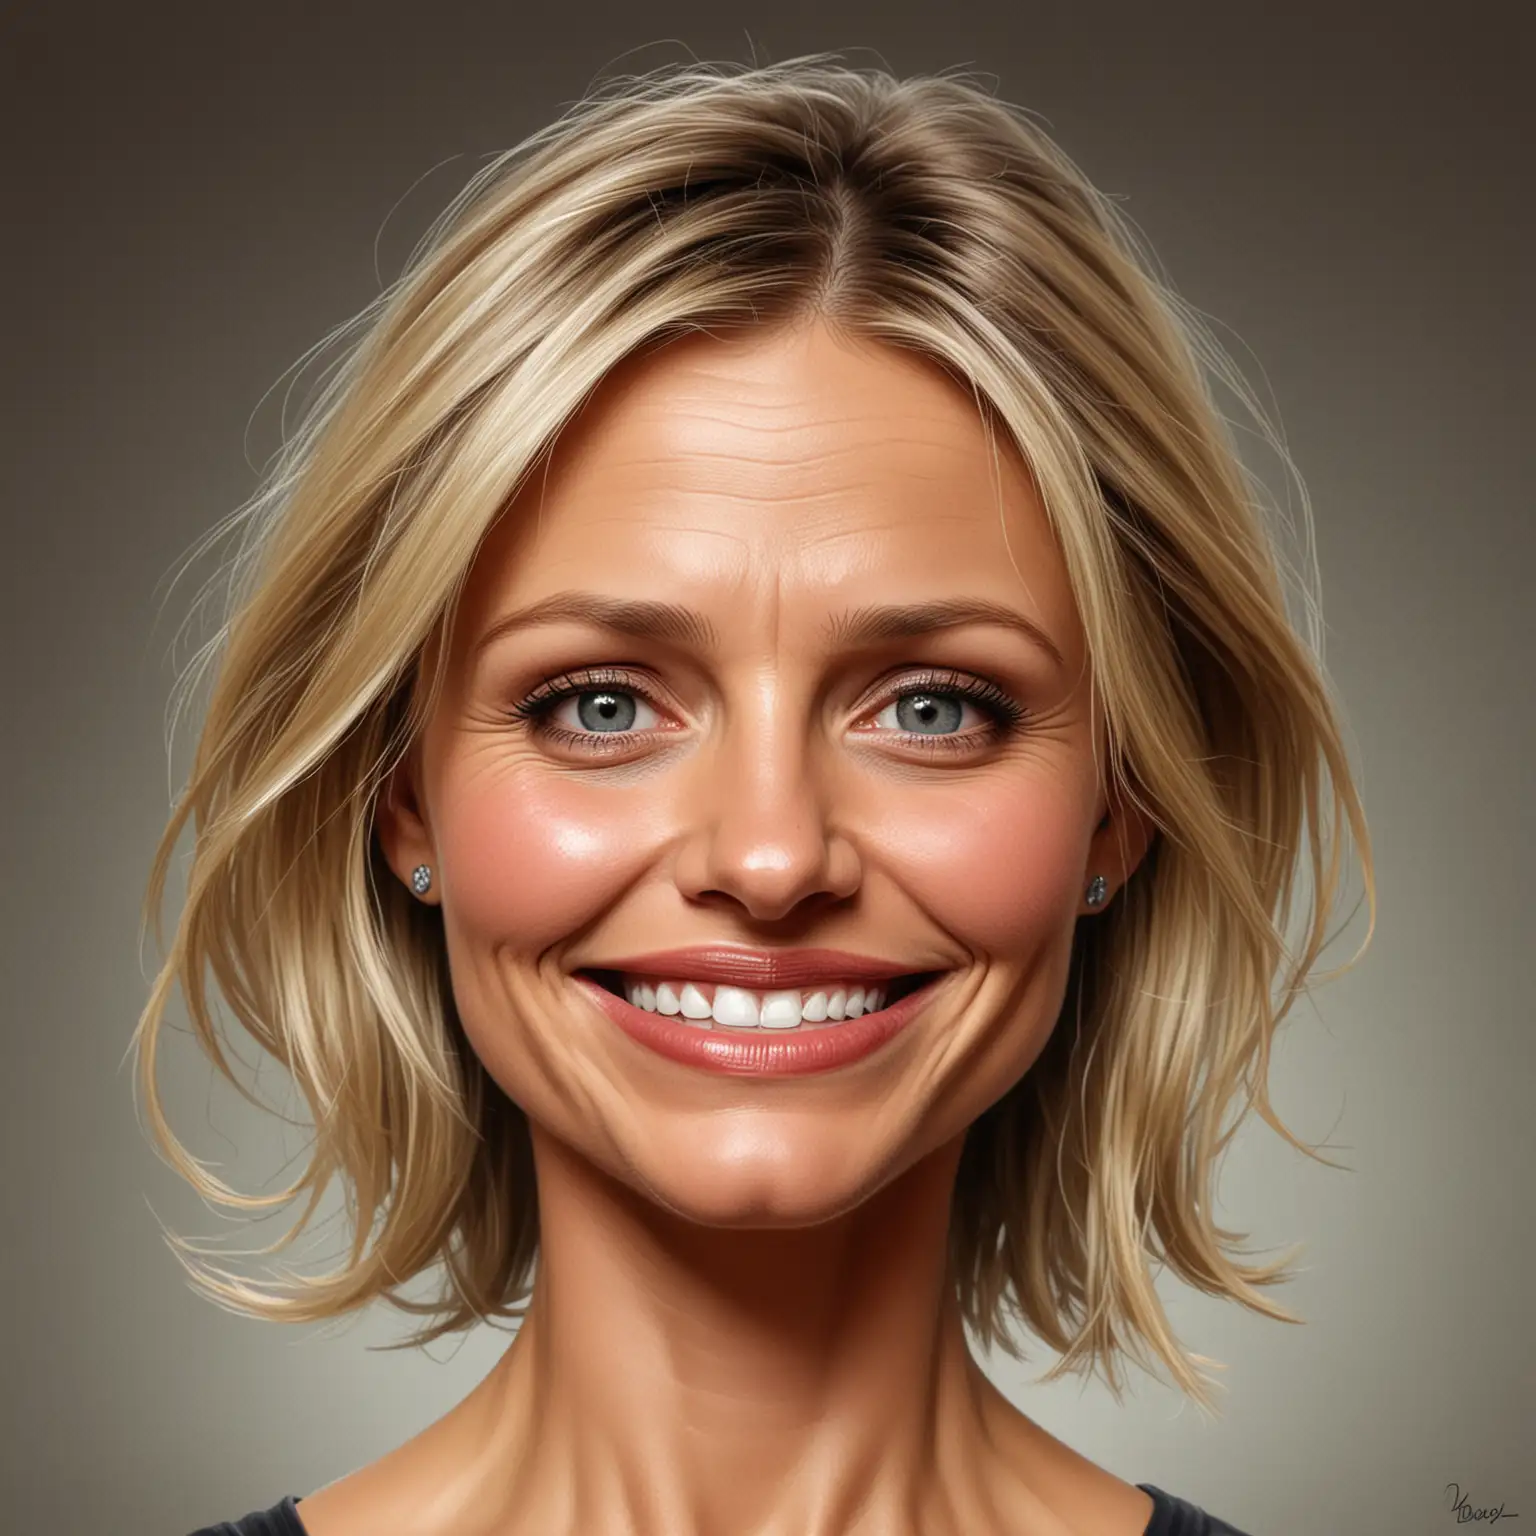 Witty Caricature of Cameron Diaz